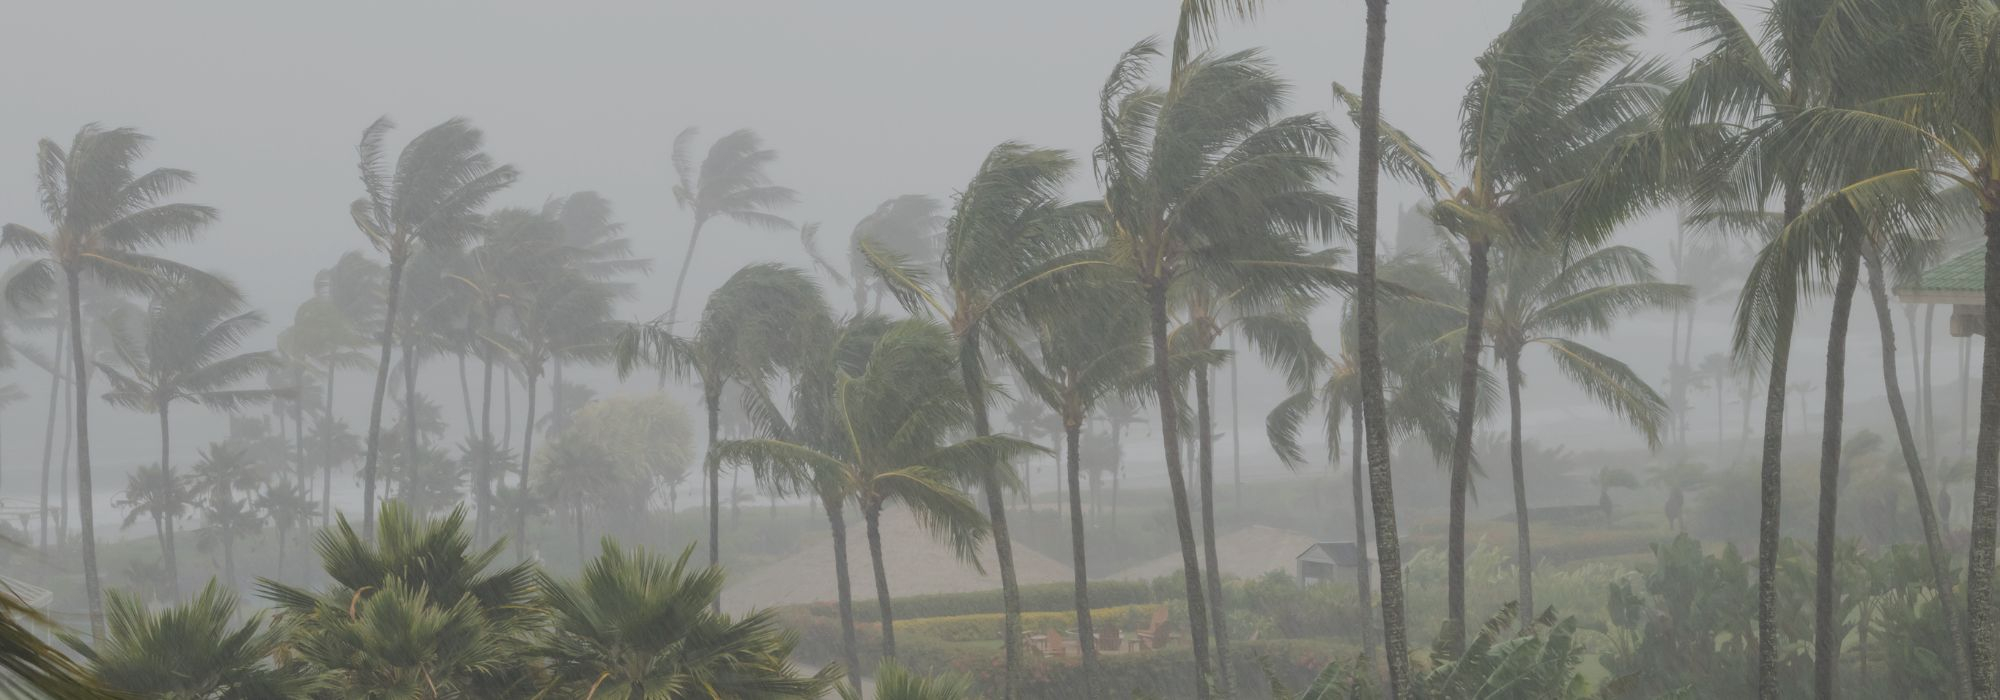 Palm trees being pushed by wind and rain.